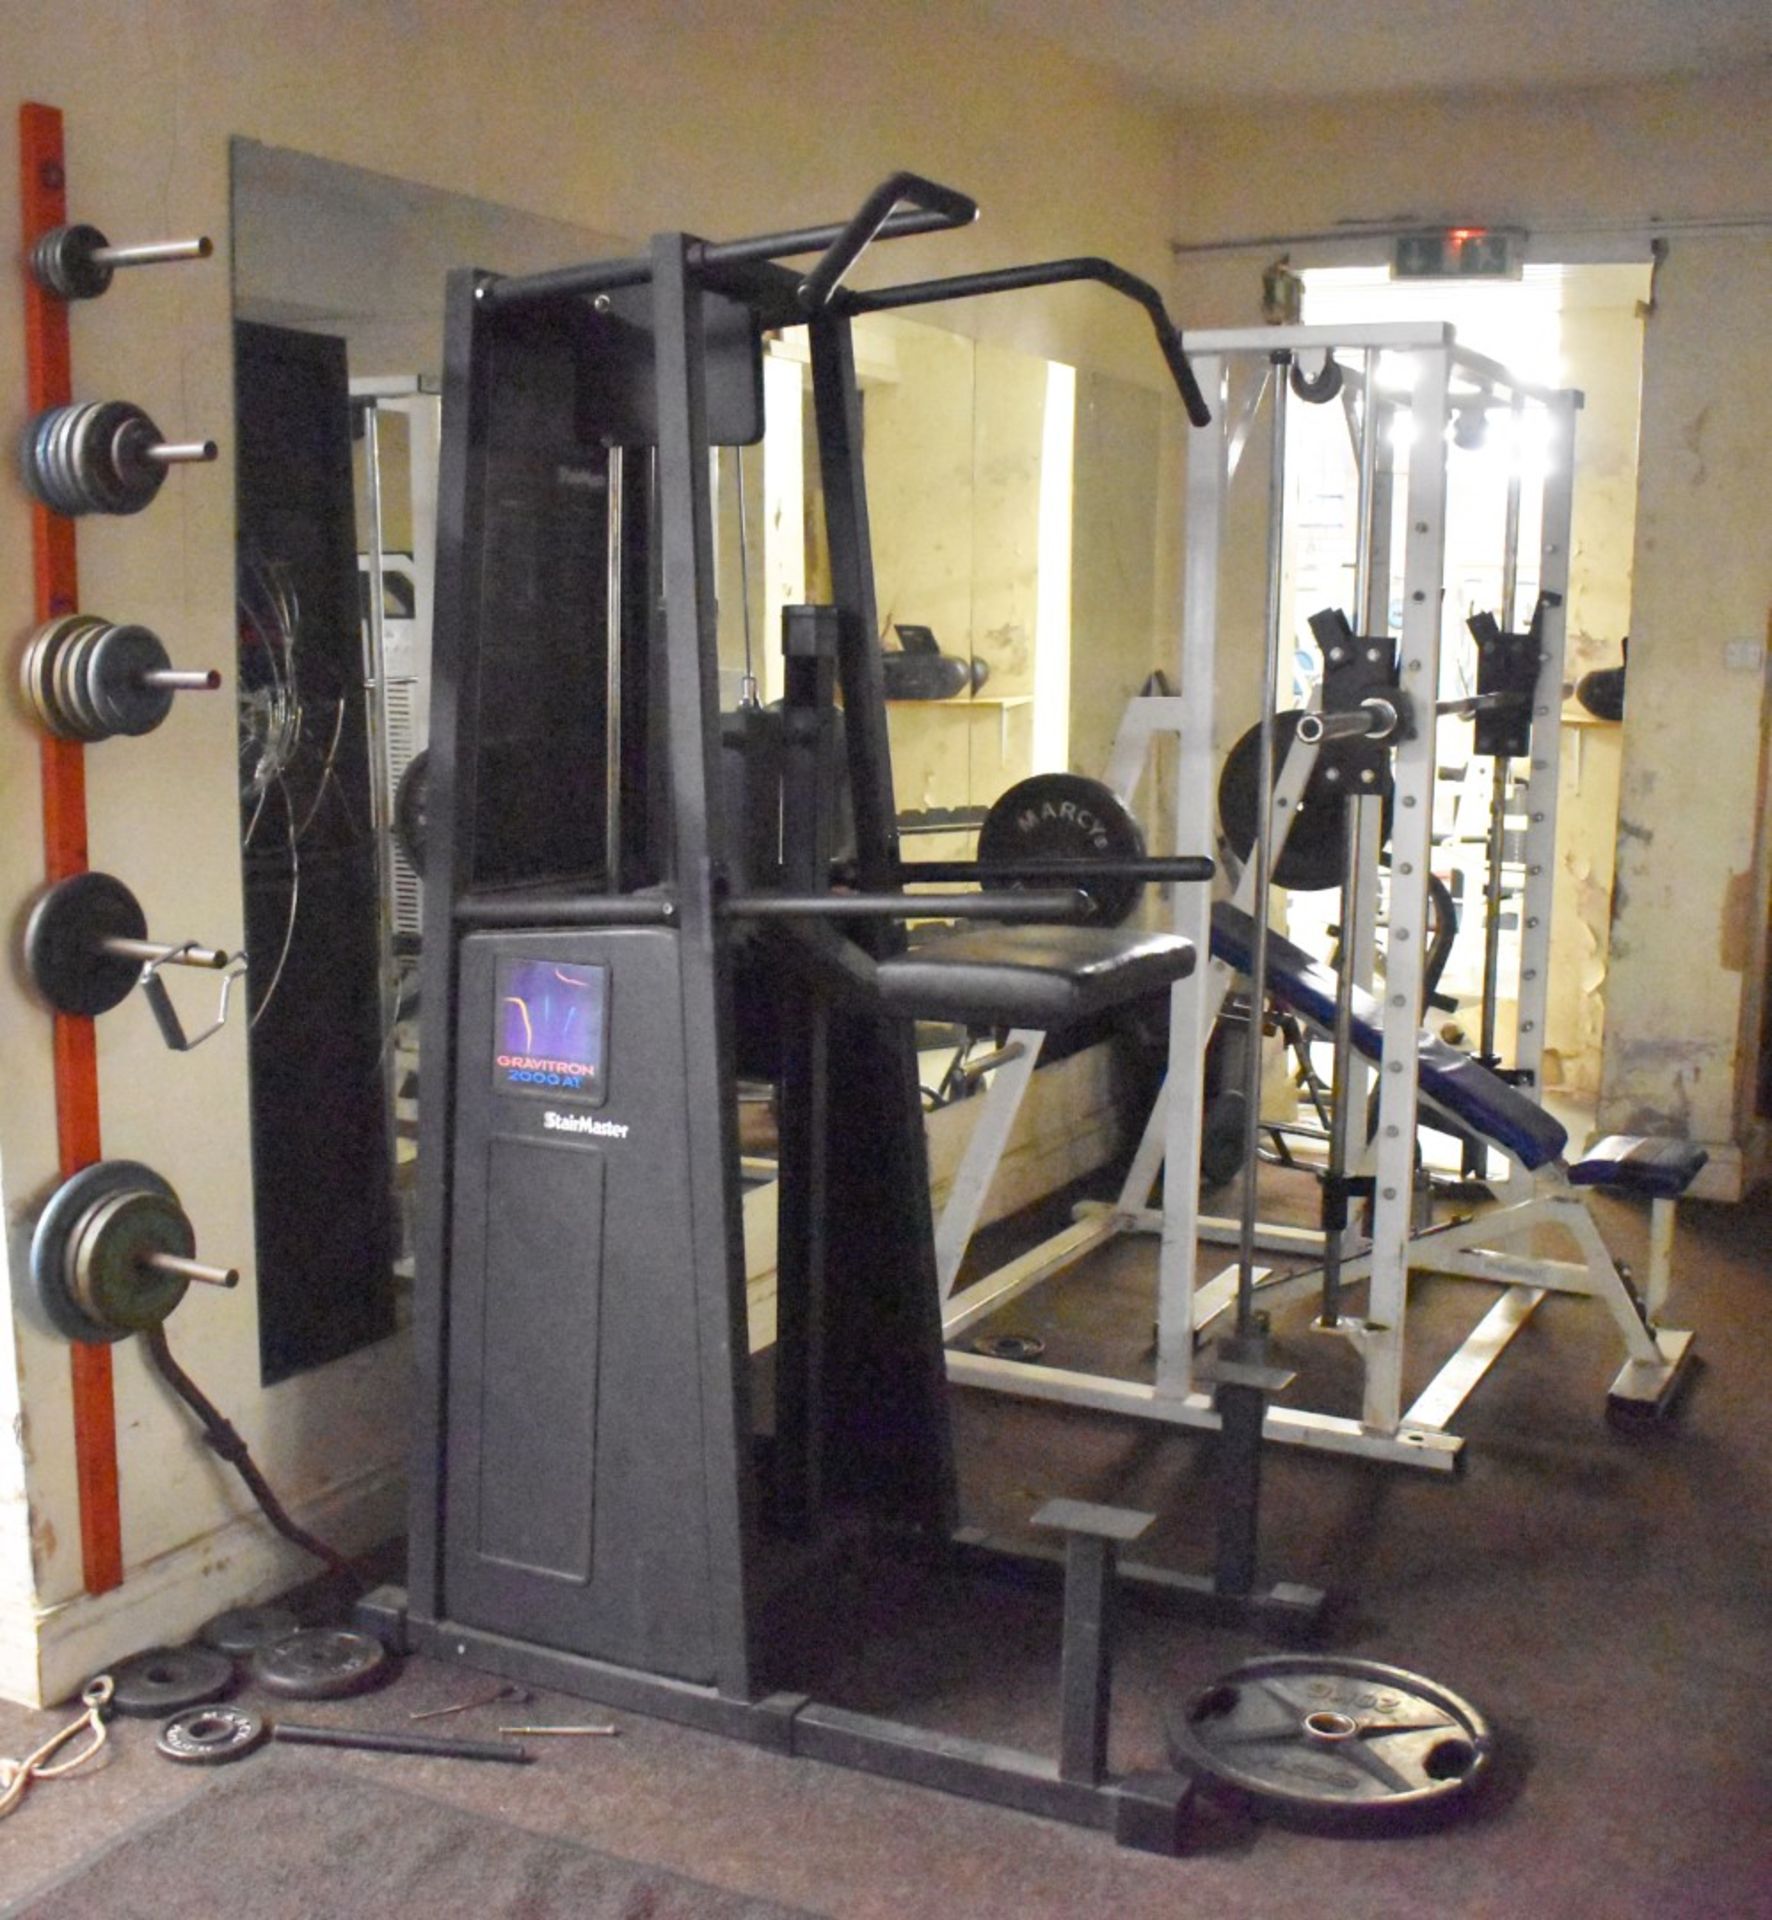 Contents of Bodybuilding and Strongman Gym - Includes Approx 30 Pieces of Gym Equipment, Floor Mats, - Image 2 of 95